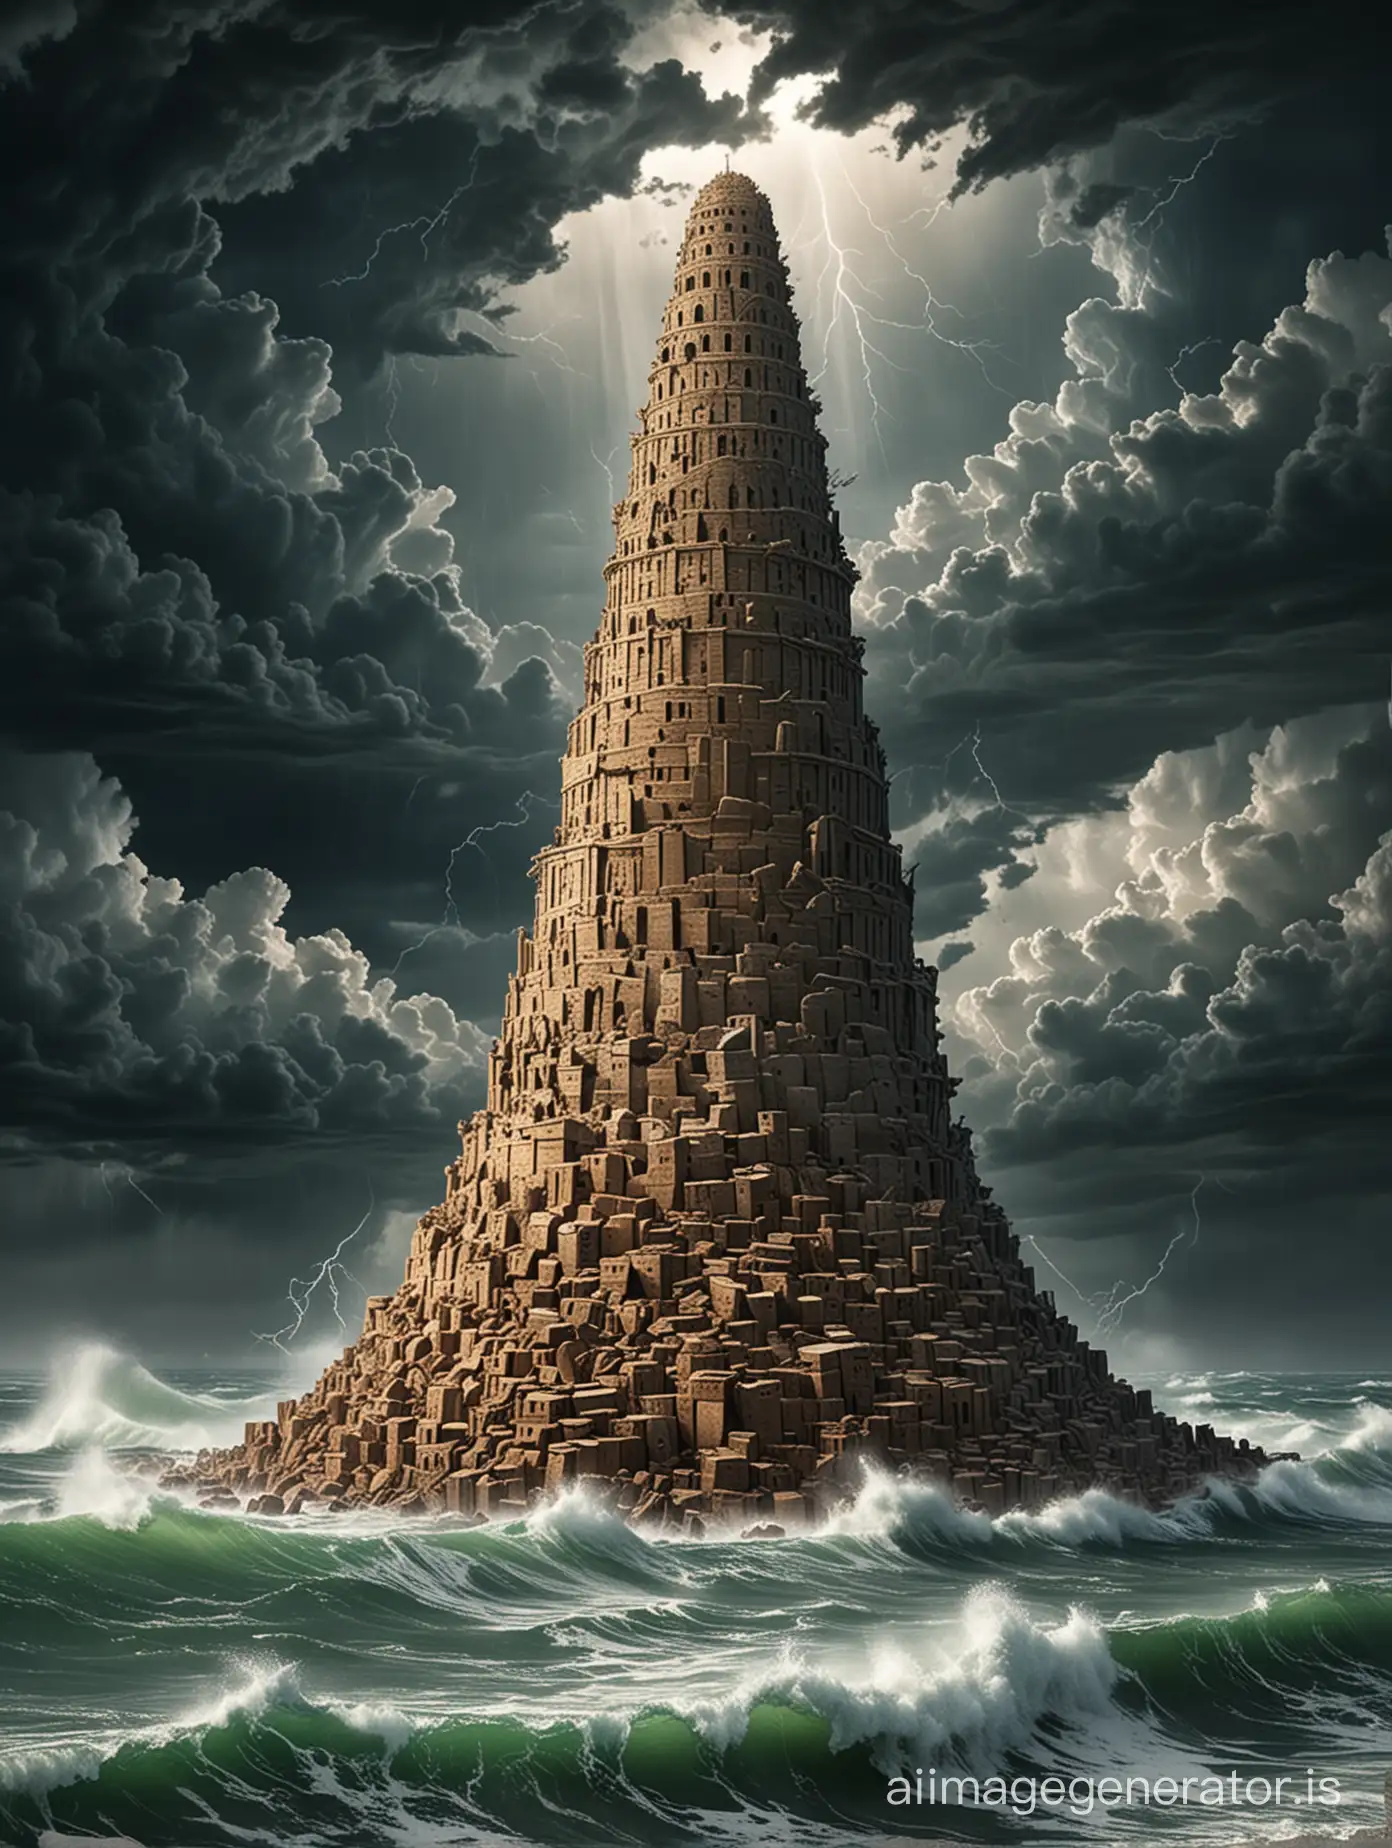 Majestic-Stone-Tower-of-Babel-Amidst-Ocean-Storm